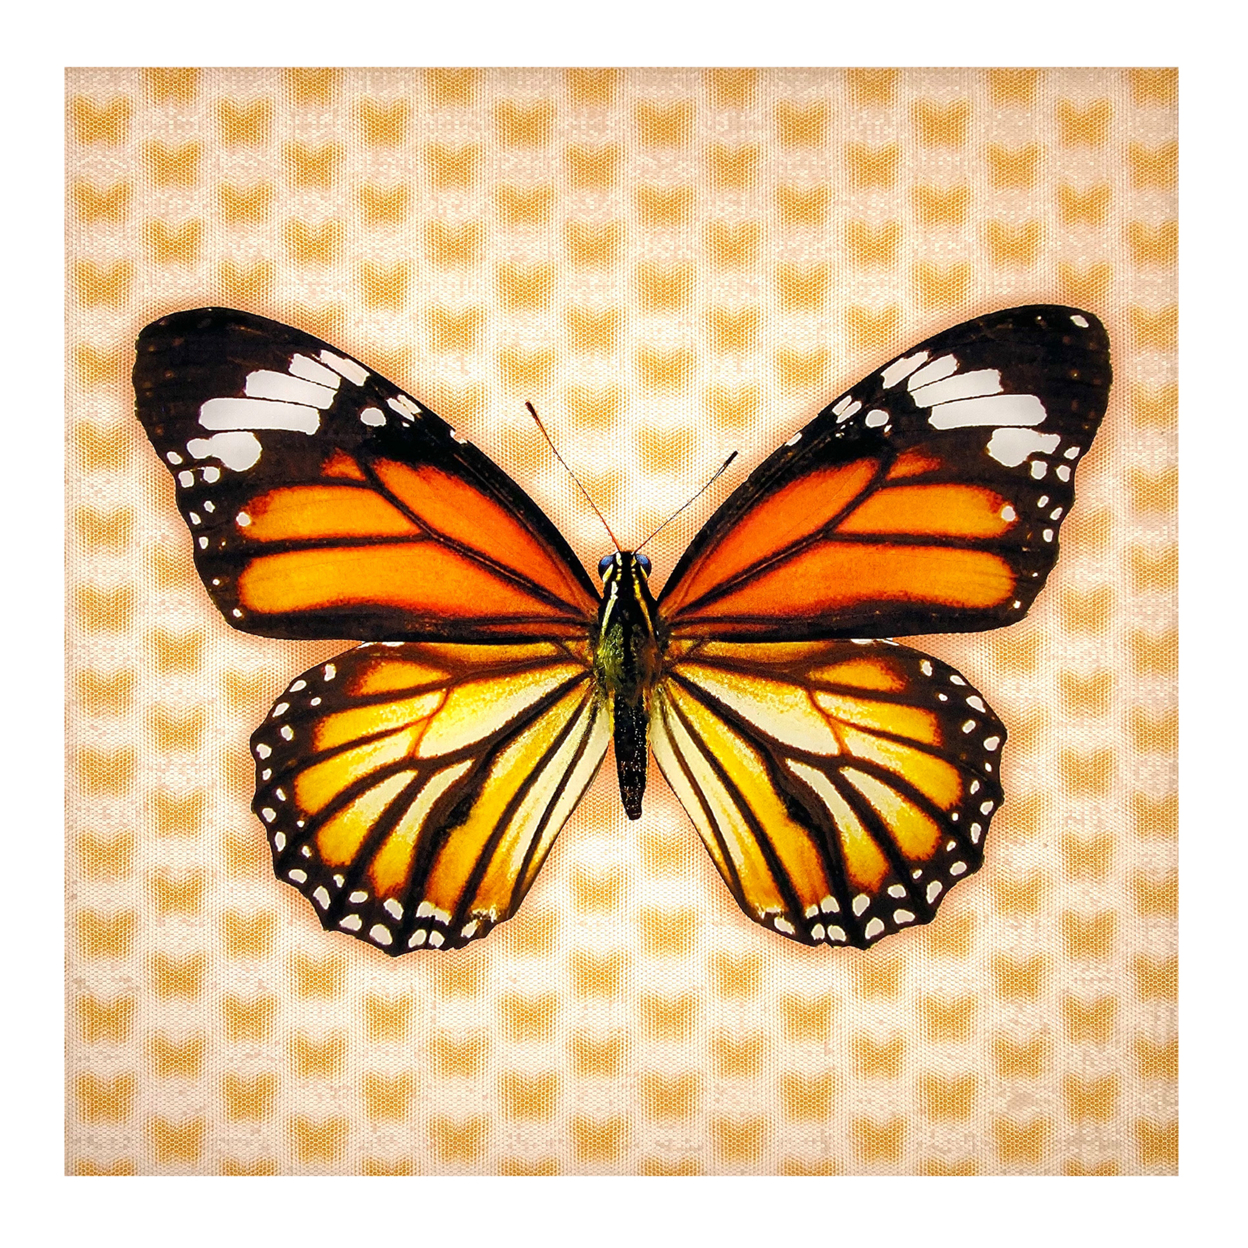 Matashi Multi-Dimensional Custom Made 5D Monrach Butterfly Wall Art Print On Strong Polycarbonate Panel With Vibrant Colors (16x16 Inch)